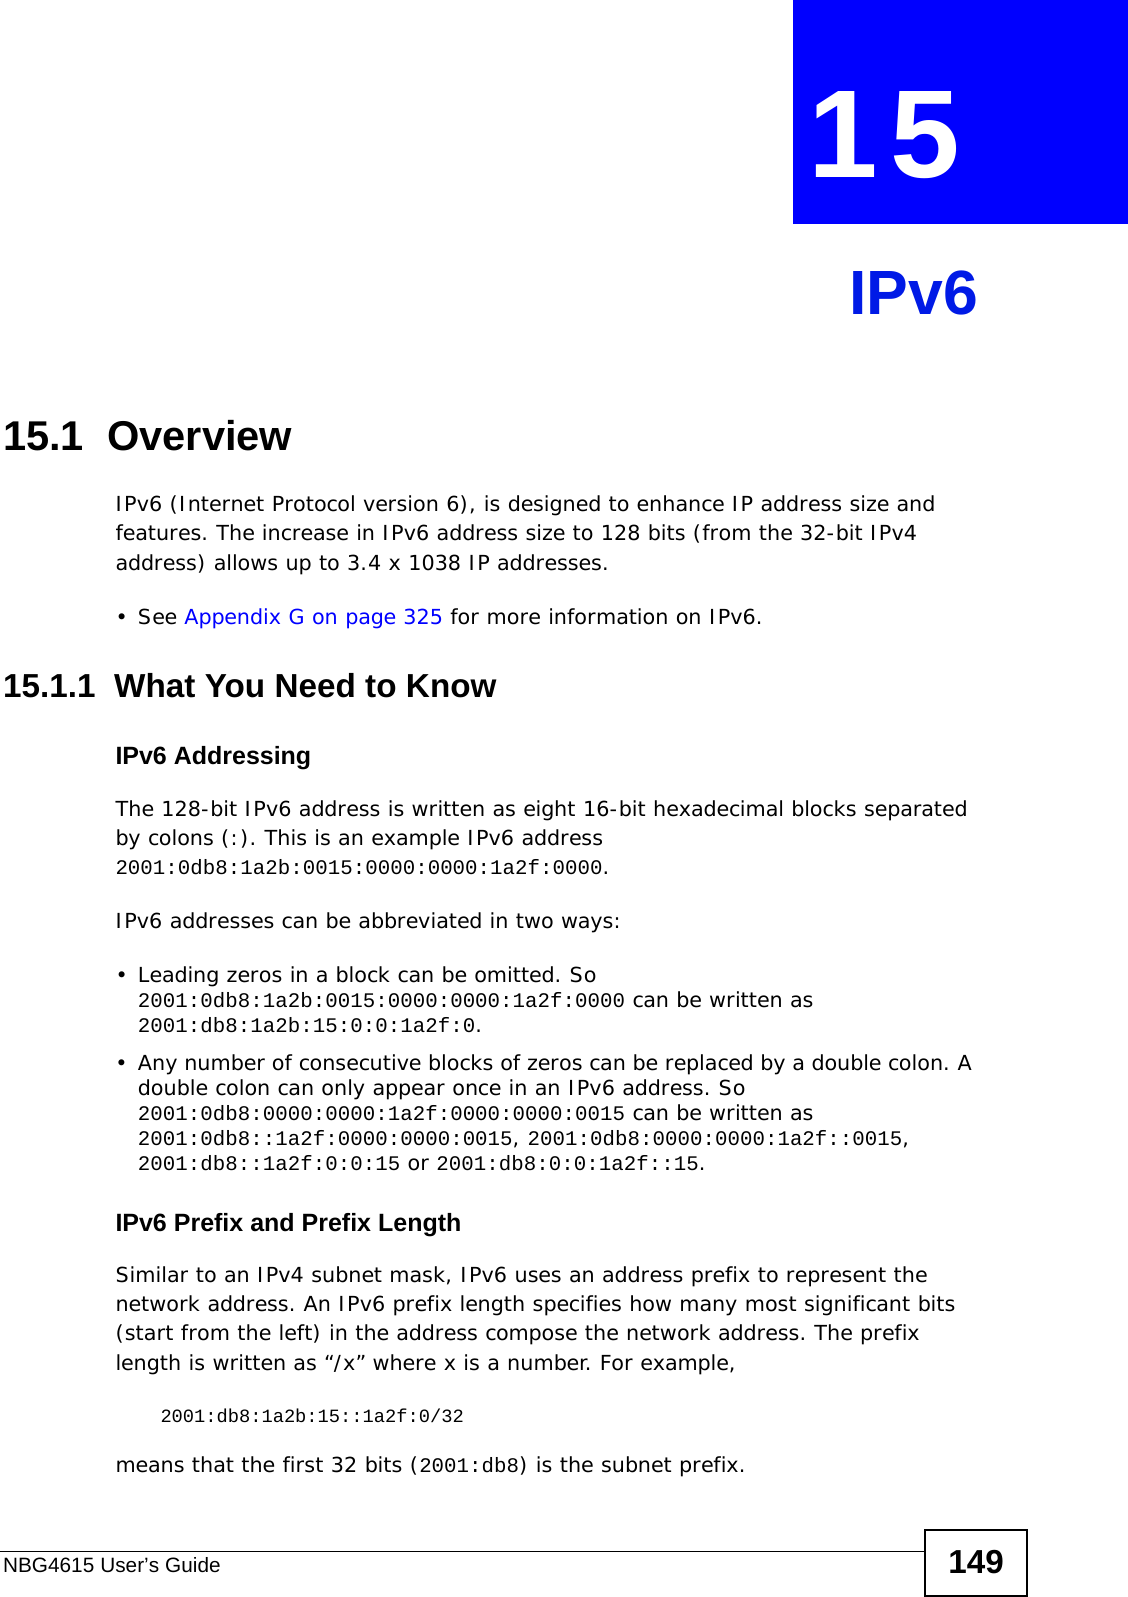 NBG4615 User’s Guide 149CHAPTER  15 IPv615.1  Overview IPv6 (Internet Protocol version 6), is designed to enhance IP address size and features. The increase in IPv6 address size to 128 bits (from the 32-bit IPv4 address) allows up to 3.4 x 1038 IP addresses. • See Appendix G on page 325 for more information on IPv6.15.1.1  What You Need to KnowIPv6 AddressingThe 128-bit IPv6 address is written as eight 16-bit hexadecimal blocks separated by colons (:). This is an example IPv6 address 2001:0db8:1a2b:0015:0000:0000:1a2f:0000.IPv6 addresses can be abbreviated in two ways:• Leading zeros in a block can be omitted. So 2001:0db8:1a2b:0015:0000:0000:1a2f:0000 can be written as 2001:db8:1a2b:15:0:0:1a2f:0. • Any number of consecutive blocks of zeros can be replaced by a double colon. A double colon can only appear once in an IPv6 address. So 2001:0db8:0000:0000:1a2f:0000:0000:0015 can be written as 2001:0db8::1a2f:0000:0000:0015, 2001:0db8:0000:0000:1a2f::0015, 2001:db8::1a2f:0:0:15 or 2001:db8:0:0:1a2f::15.IPv6 Prefix and Prefix LengthSimilar to an IPv4 subnet mask, IPv6 uses an address prefix to represent the network address. An IPv6 prefix length specifies how many most significant bits (start from the left) in the address compose the network address. The prefix length is written as “/x” where x is a number. For example, 2001:db8:1a2b:15::1a2f:0/32means that the first 32 bits (2001:db8) is the subnet prefix. 